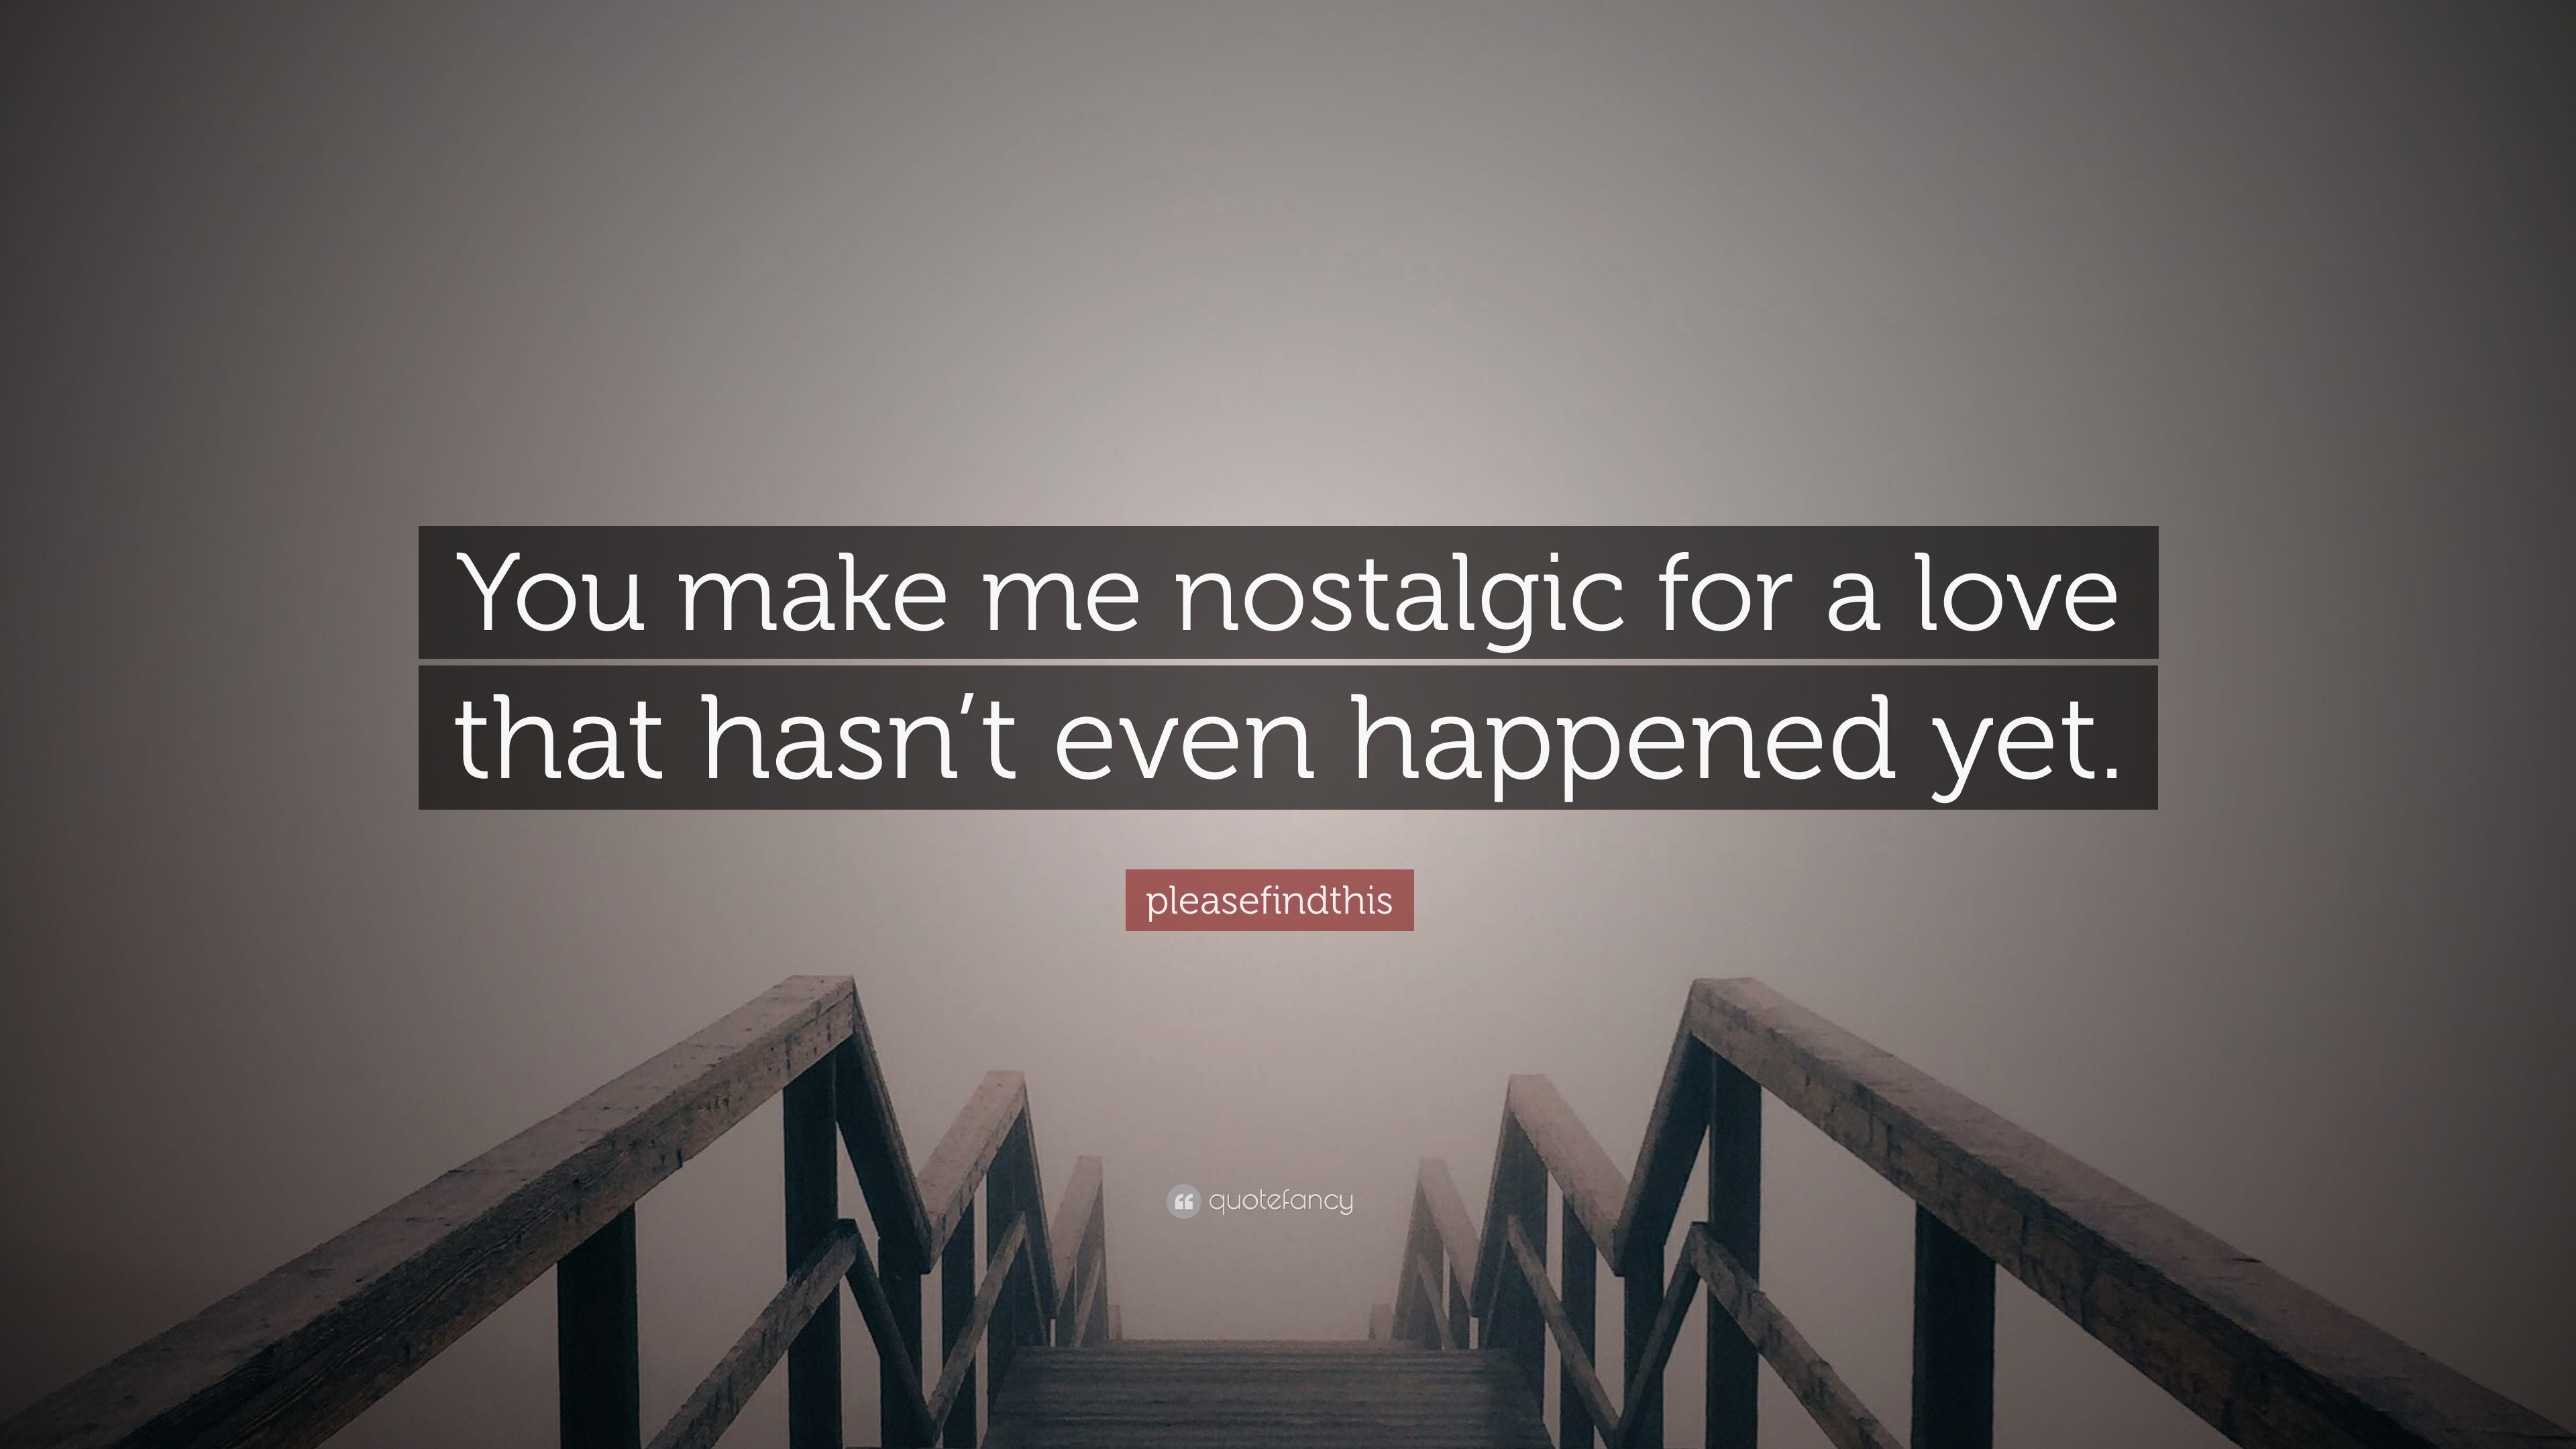 pleasefindthis Quote “You make me nostalgic for a love that hasn t even